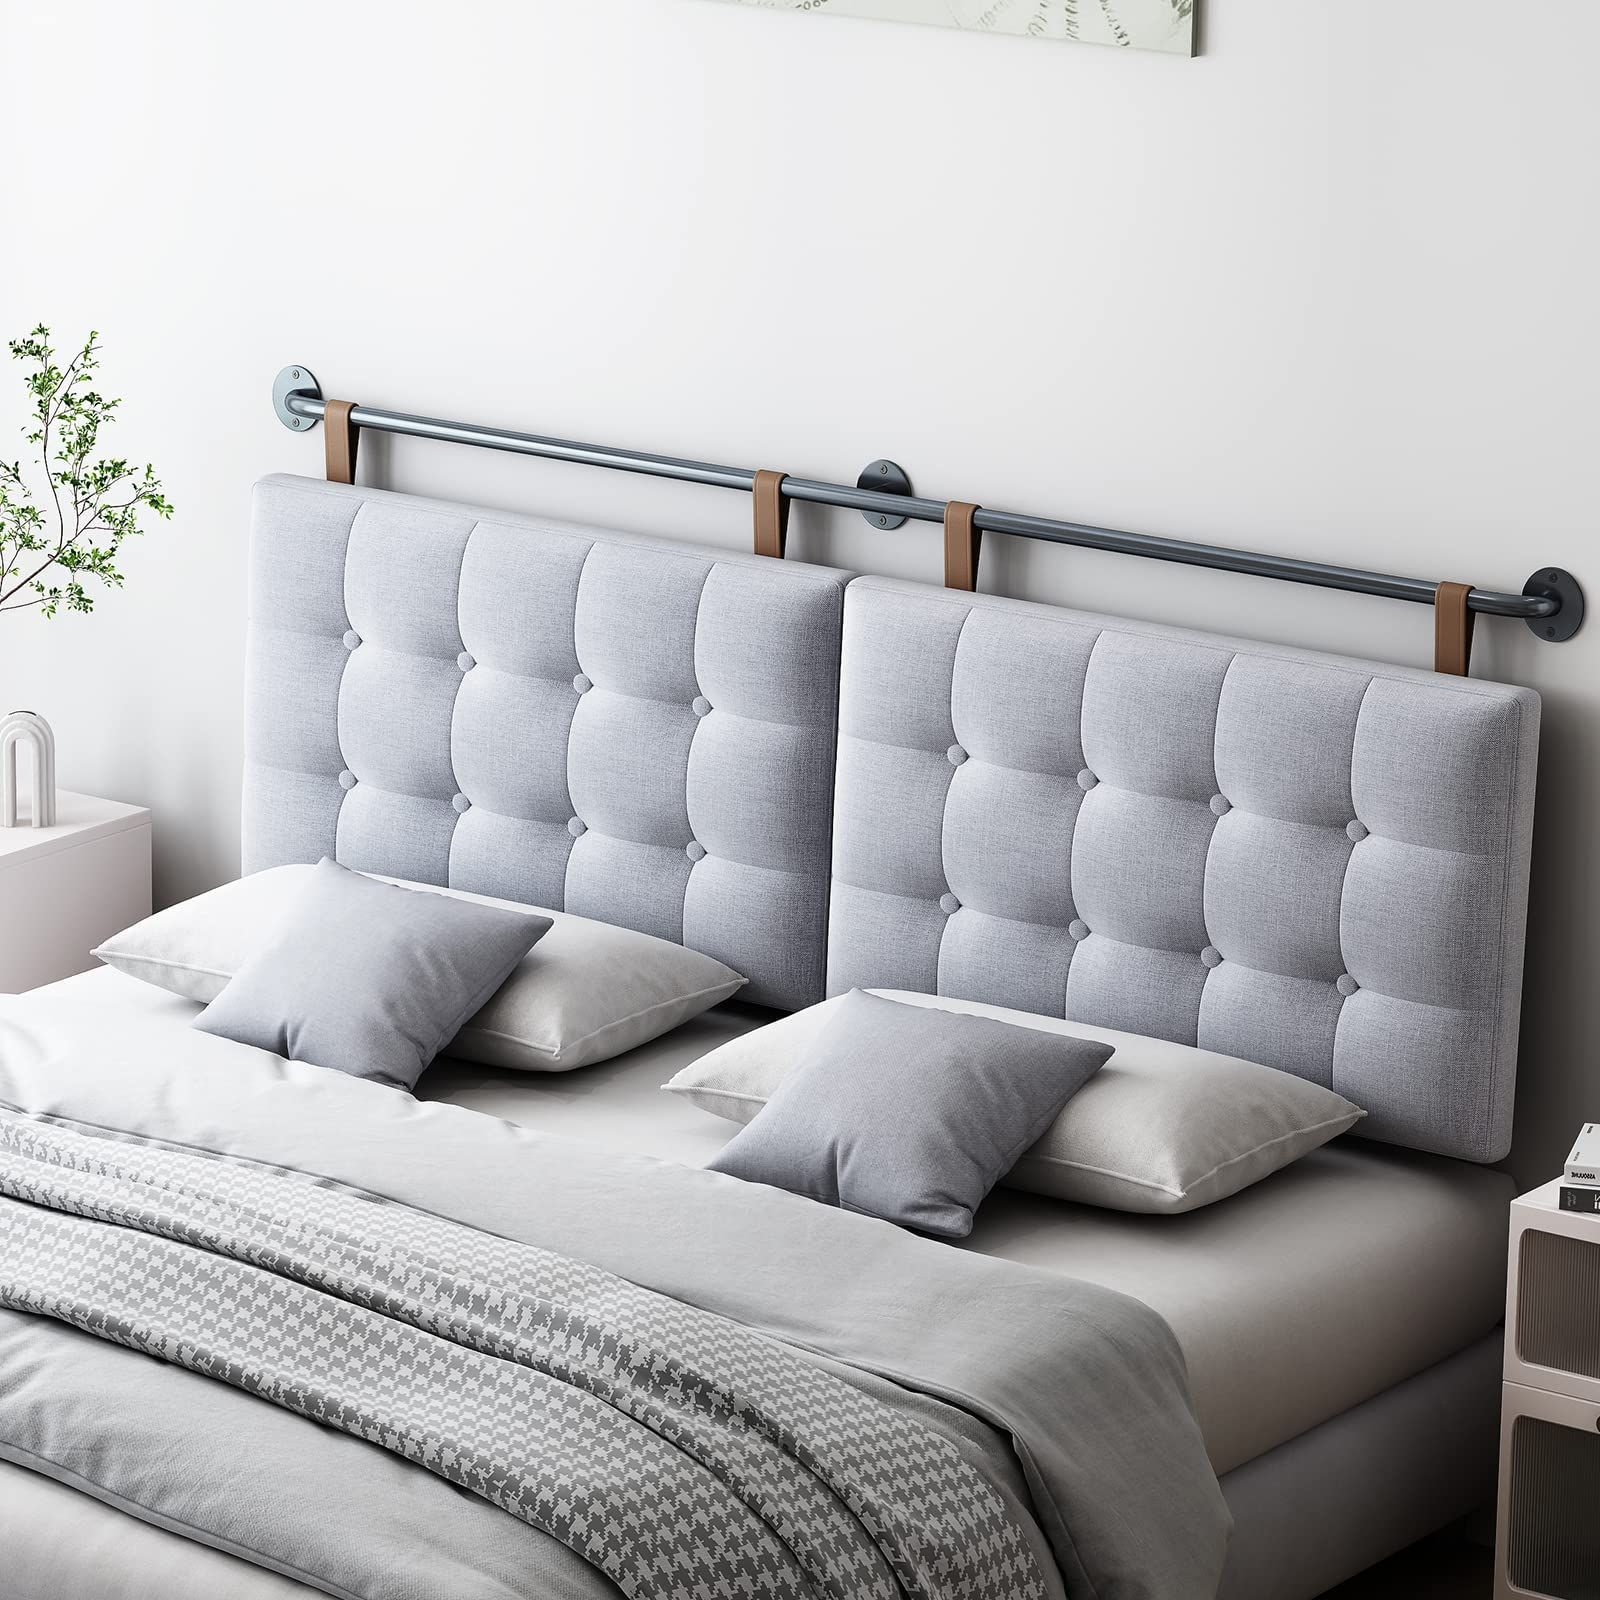 The Luxurious Appeal of a Tufted Upholstered Headboard for a King-Size Bed